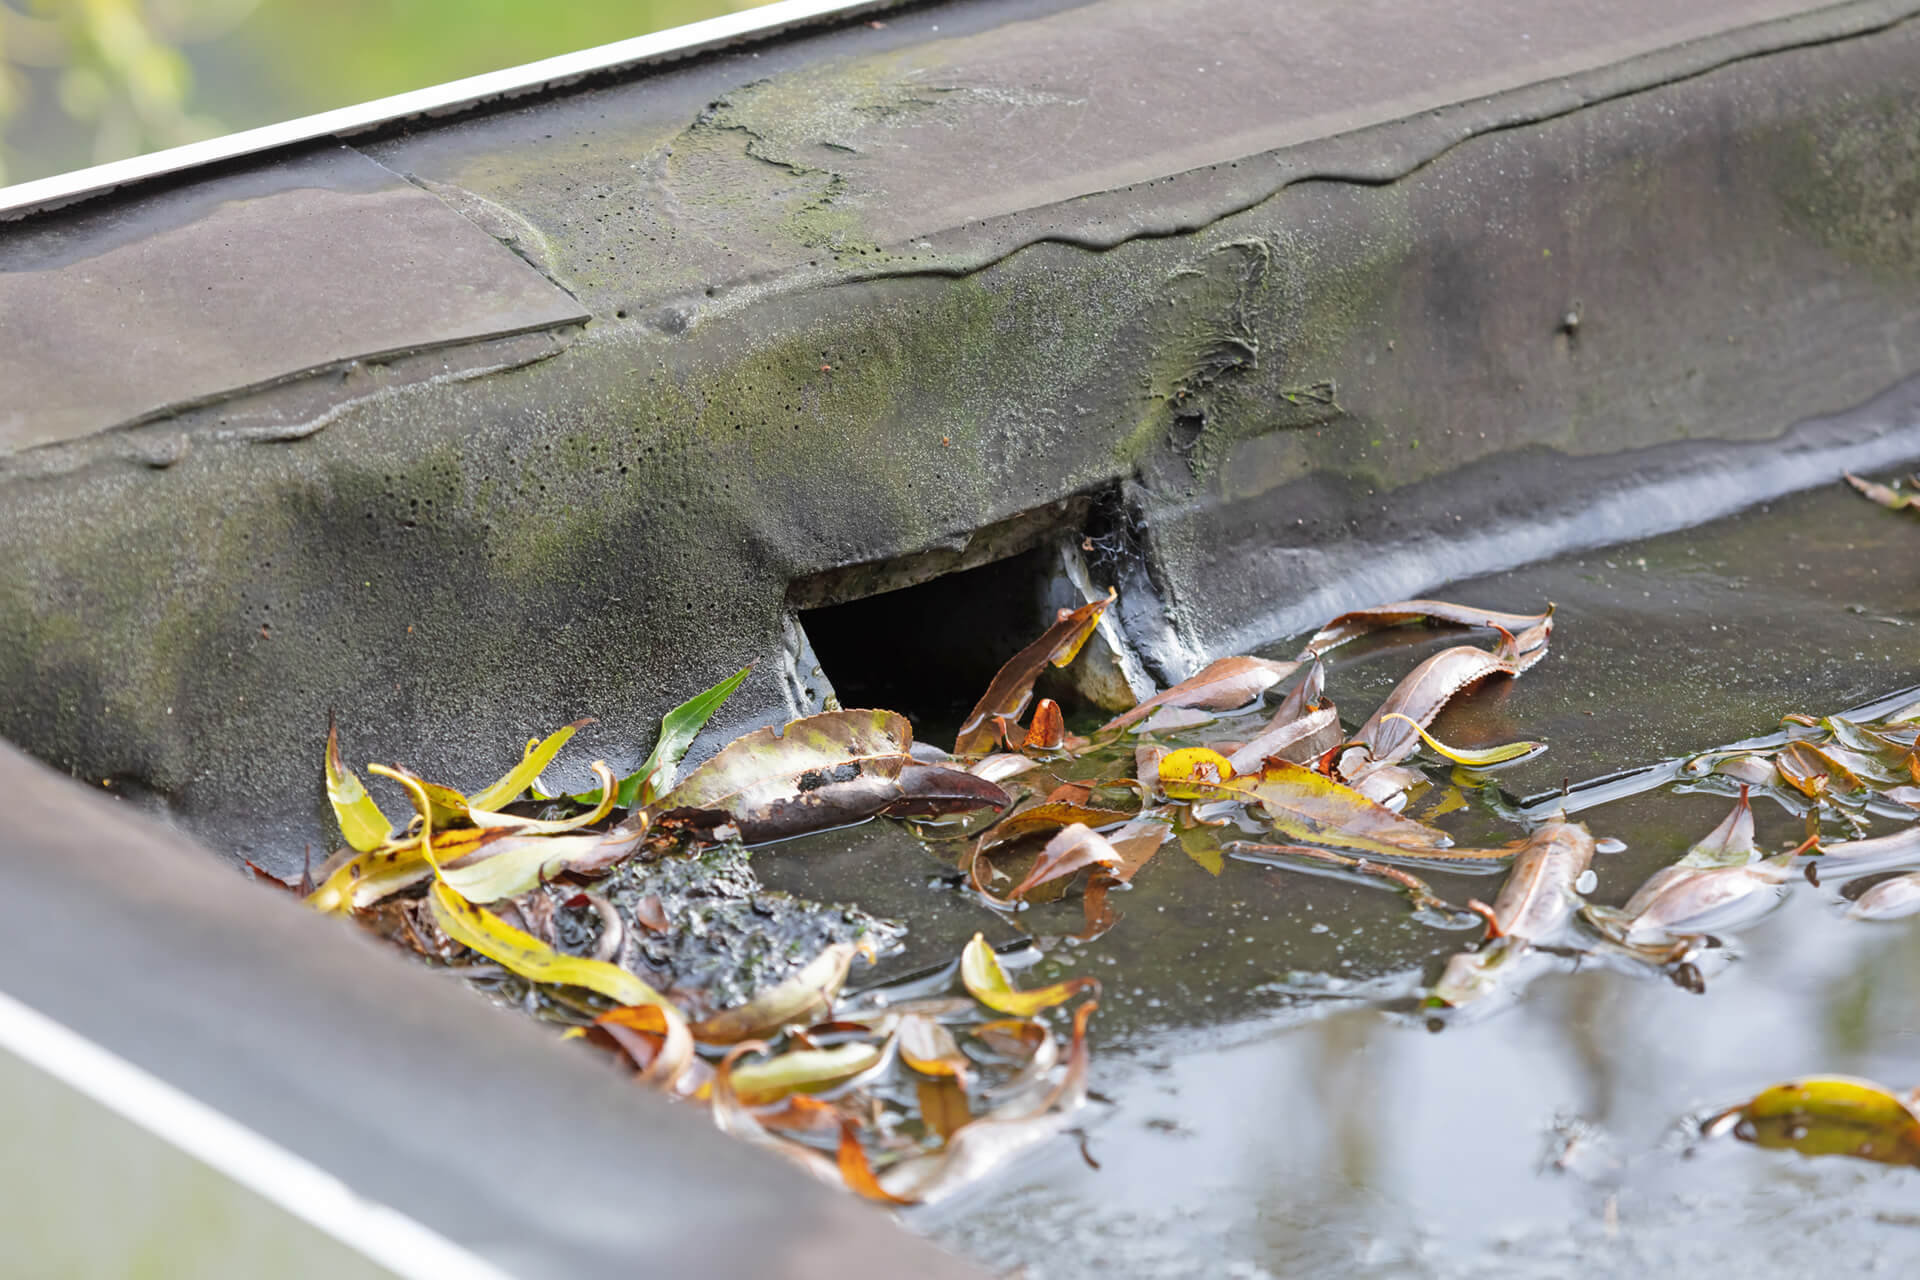 A clogged drain on a flat roof.